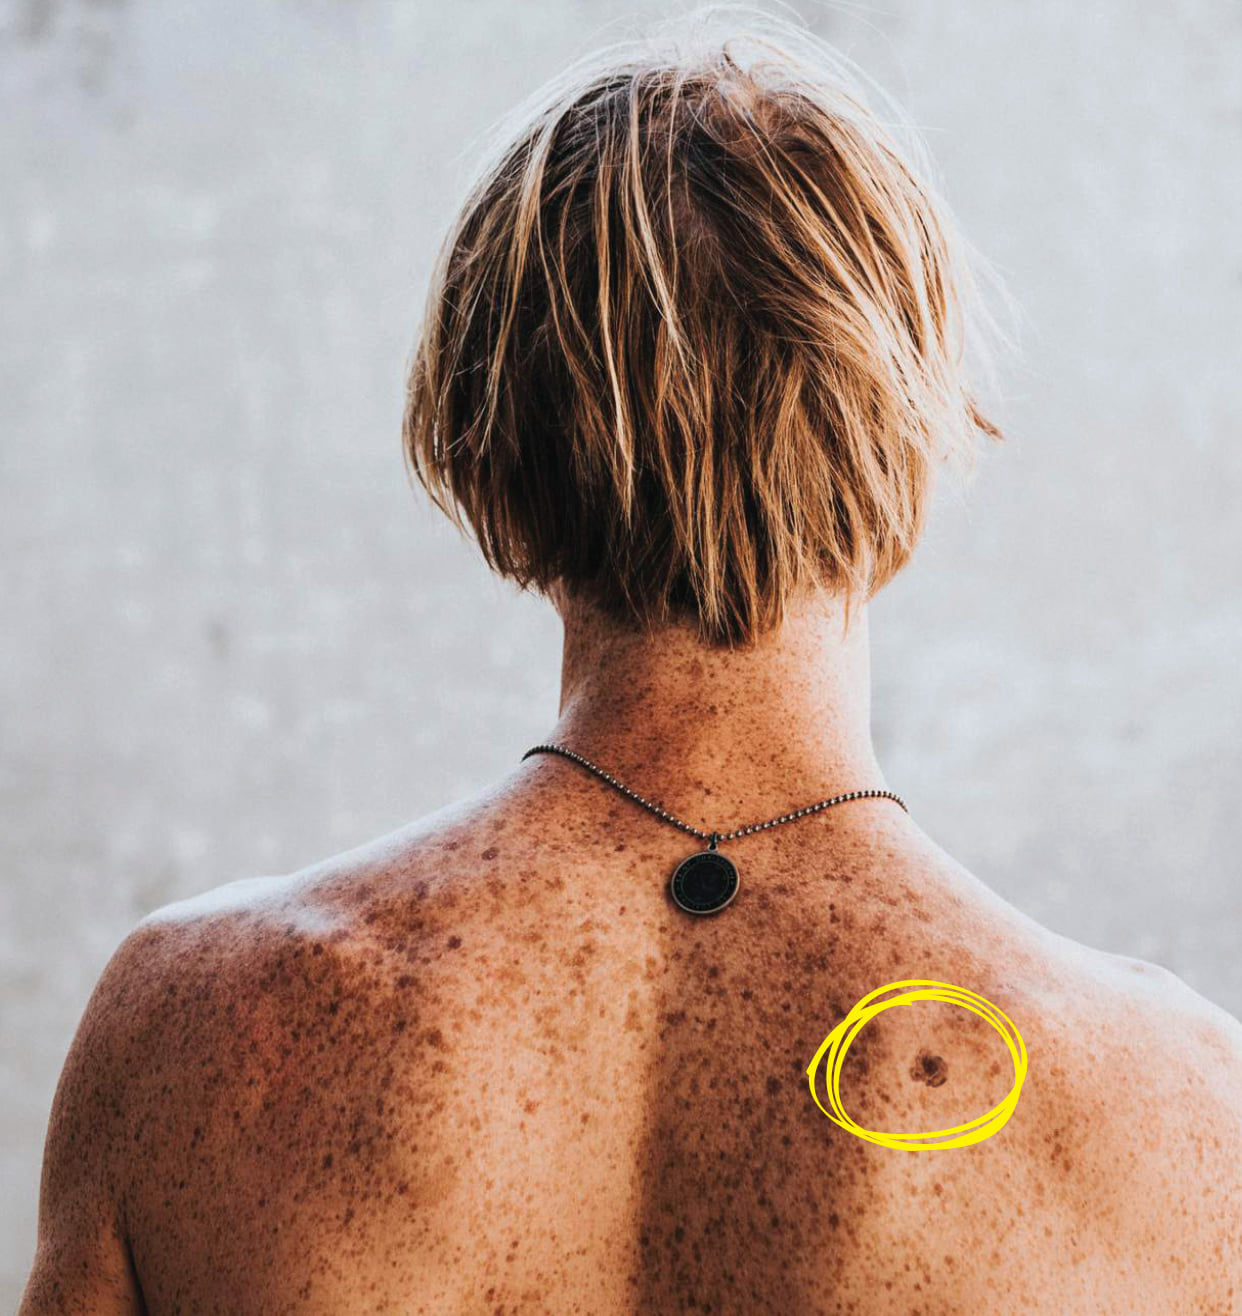 A man with many spots on his back has a mole circled to indicate something potentially harmful